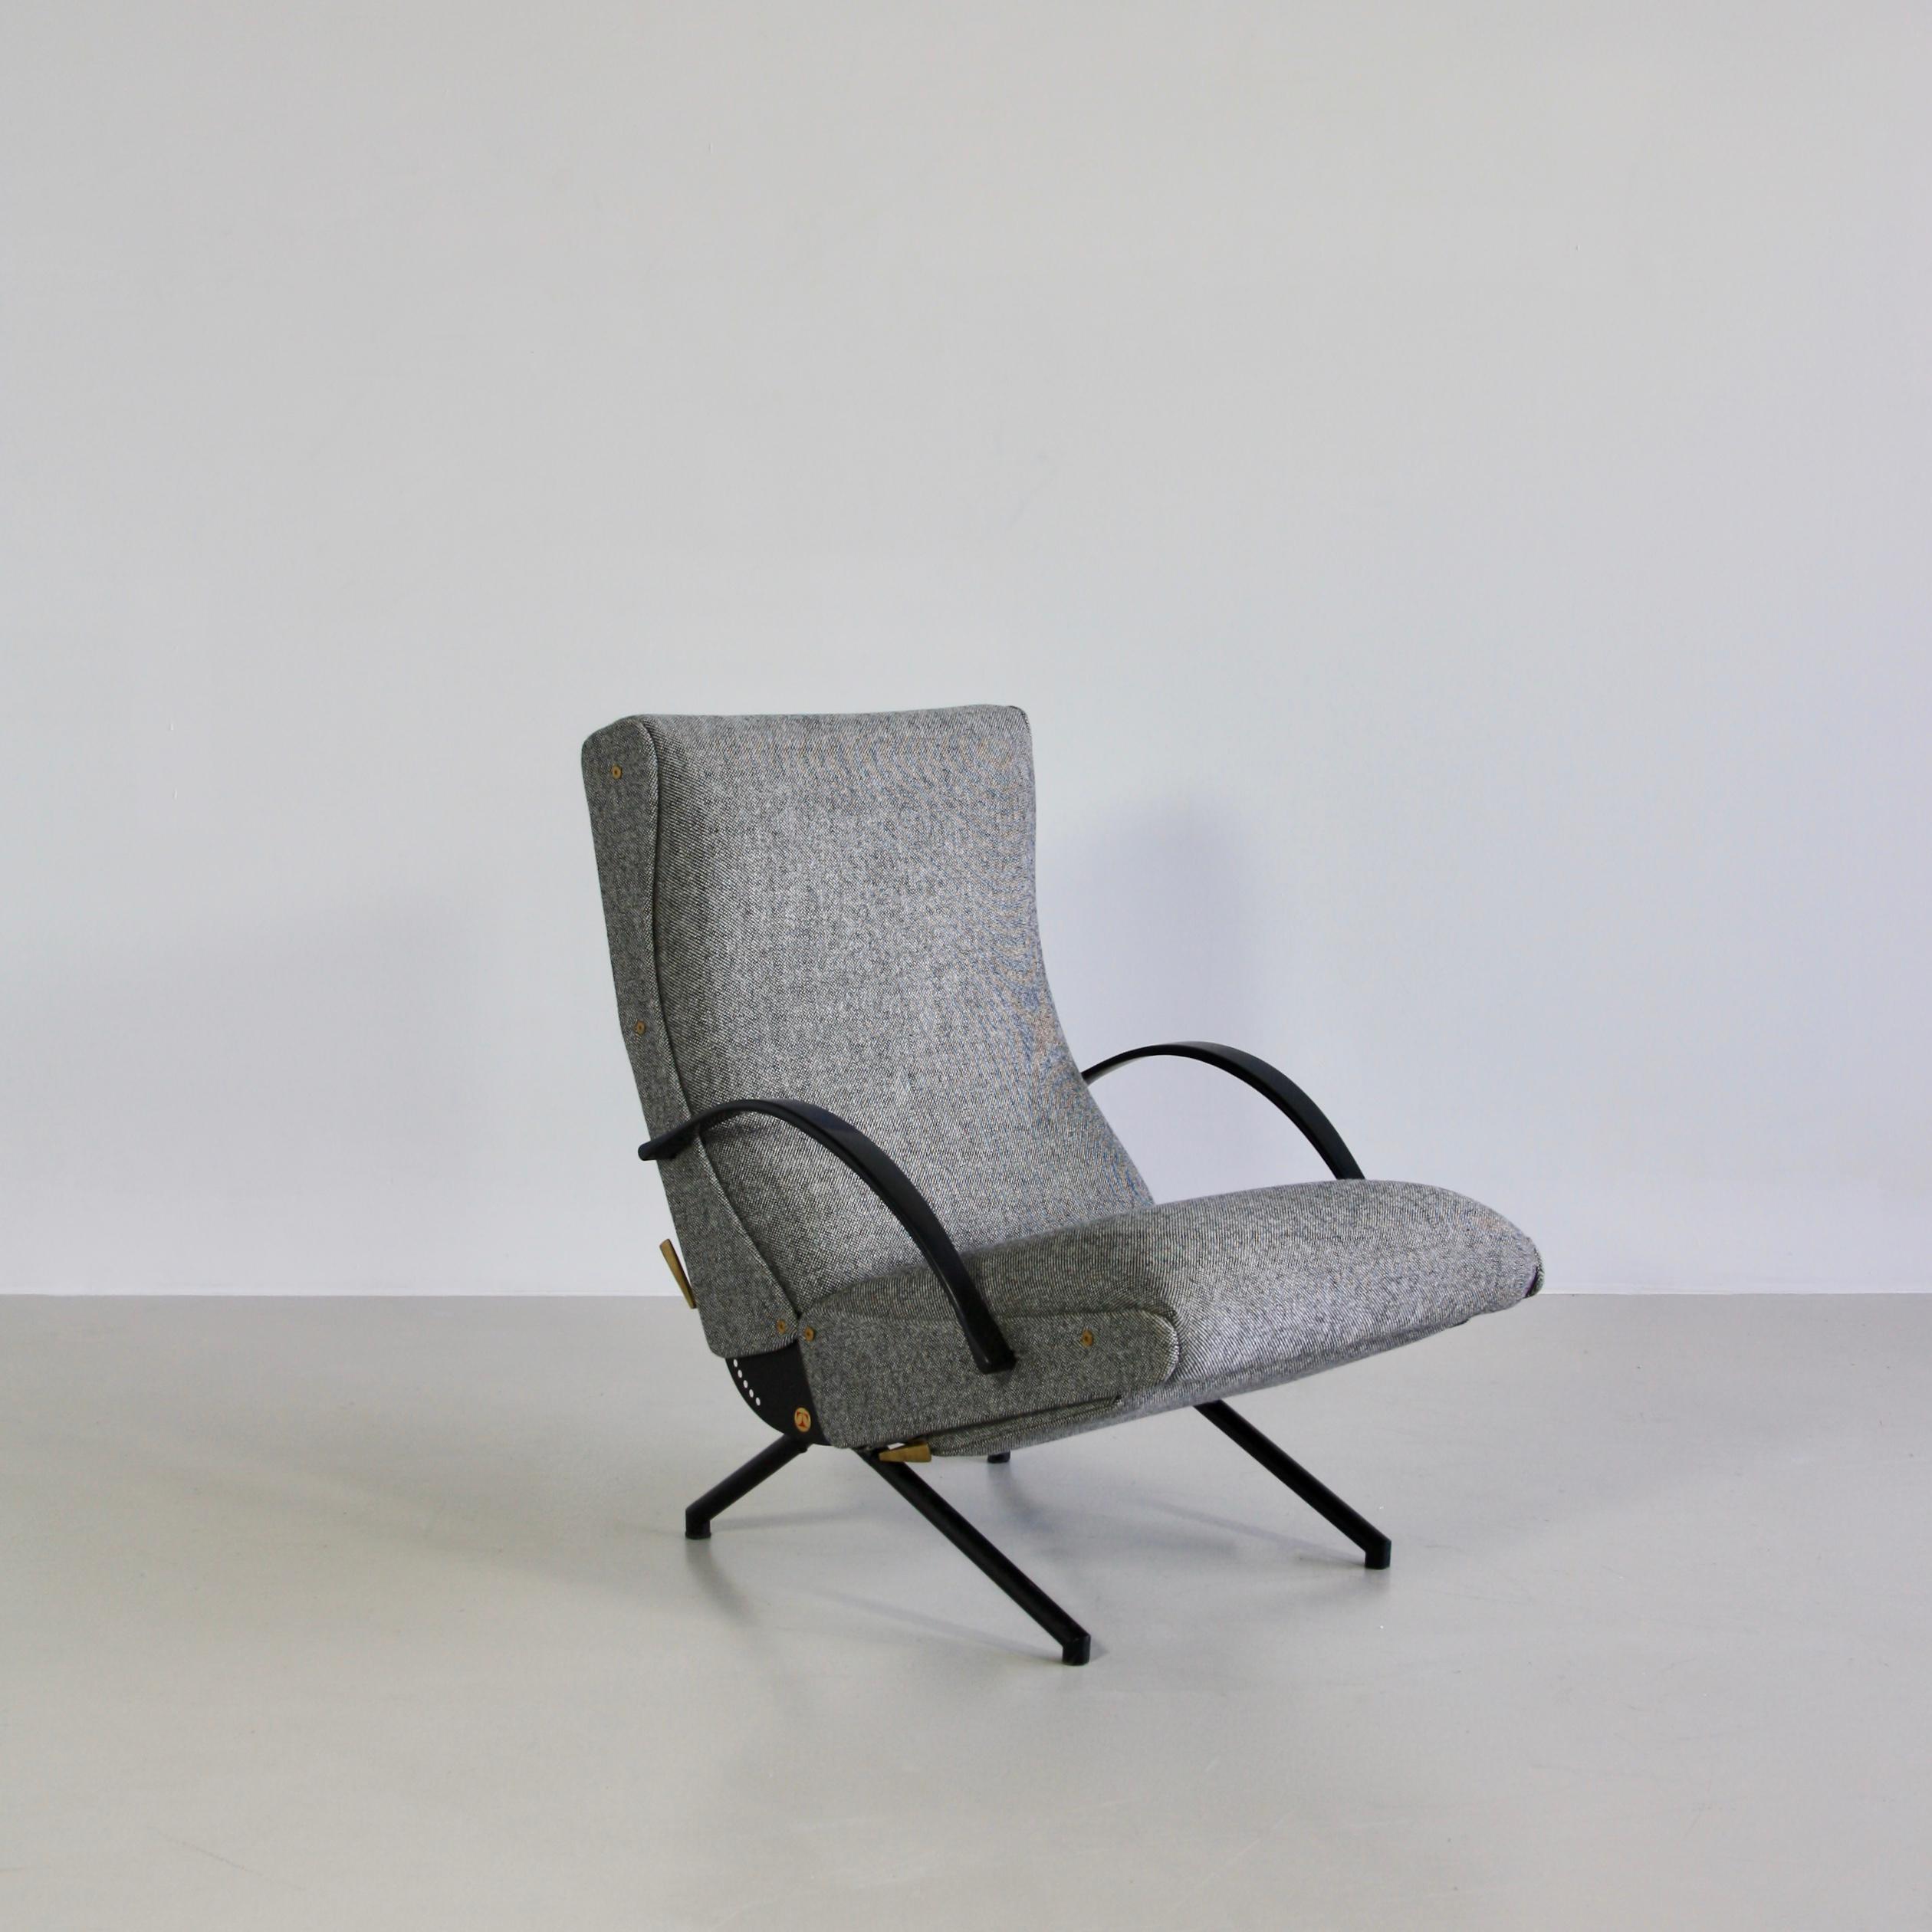 The 'P40' variable tilt armchair, produced by Tecno, Milan 1956. Black tubular frame with rubber armrests. Seat, back and footrest upholstered in yellow wool fabric. The footrest is stored under the seat. Brass detail.

The first edition of this